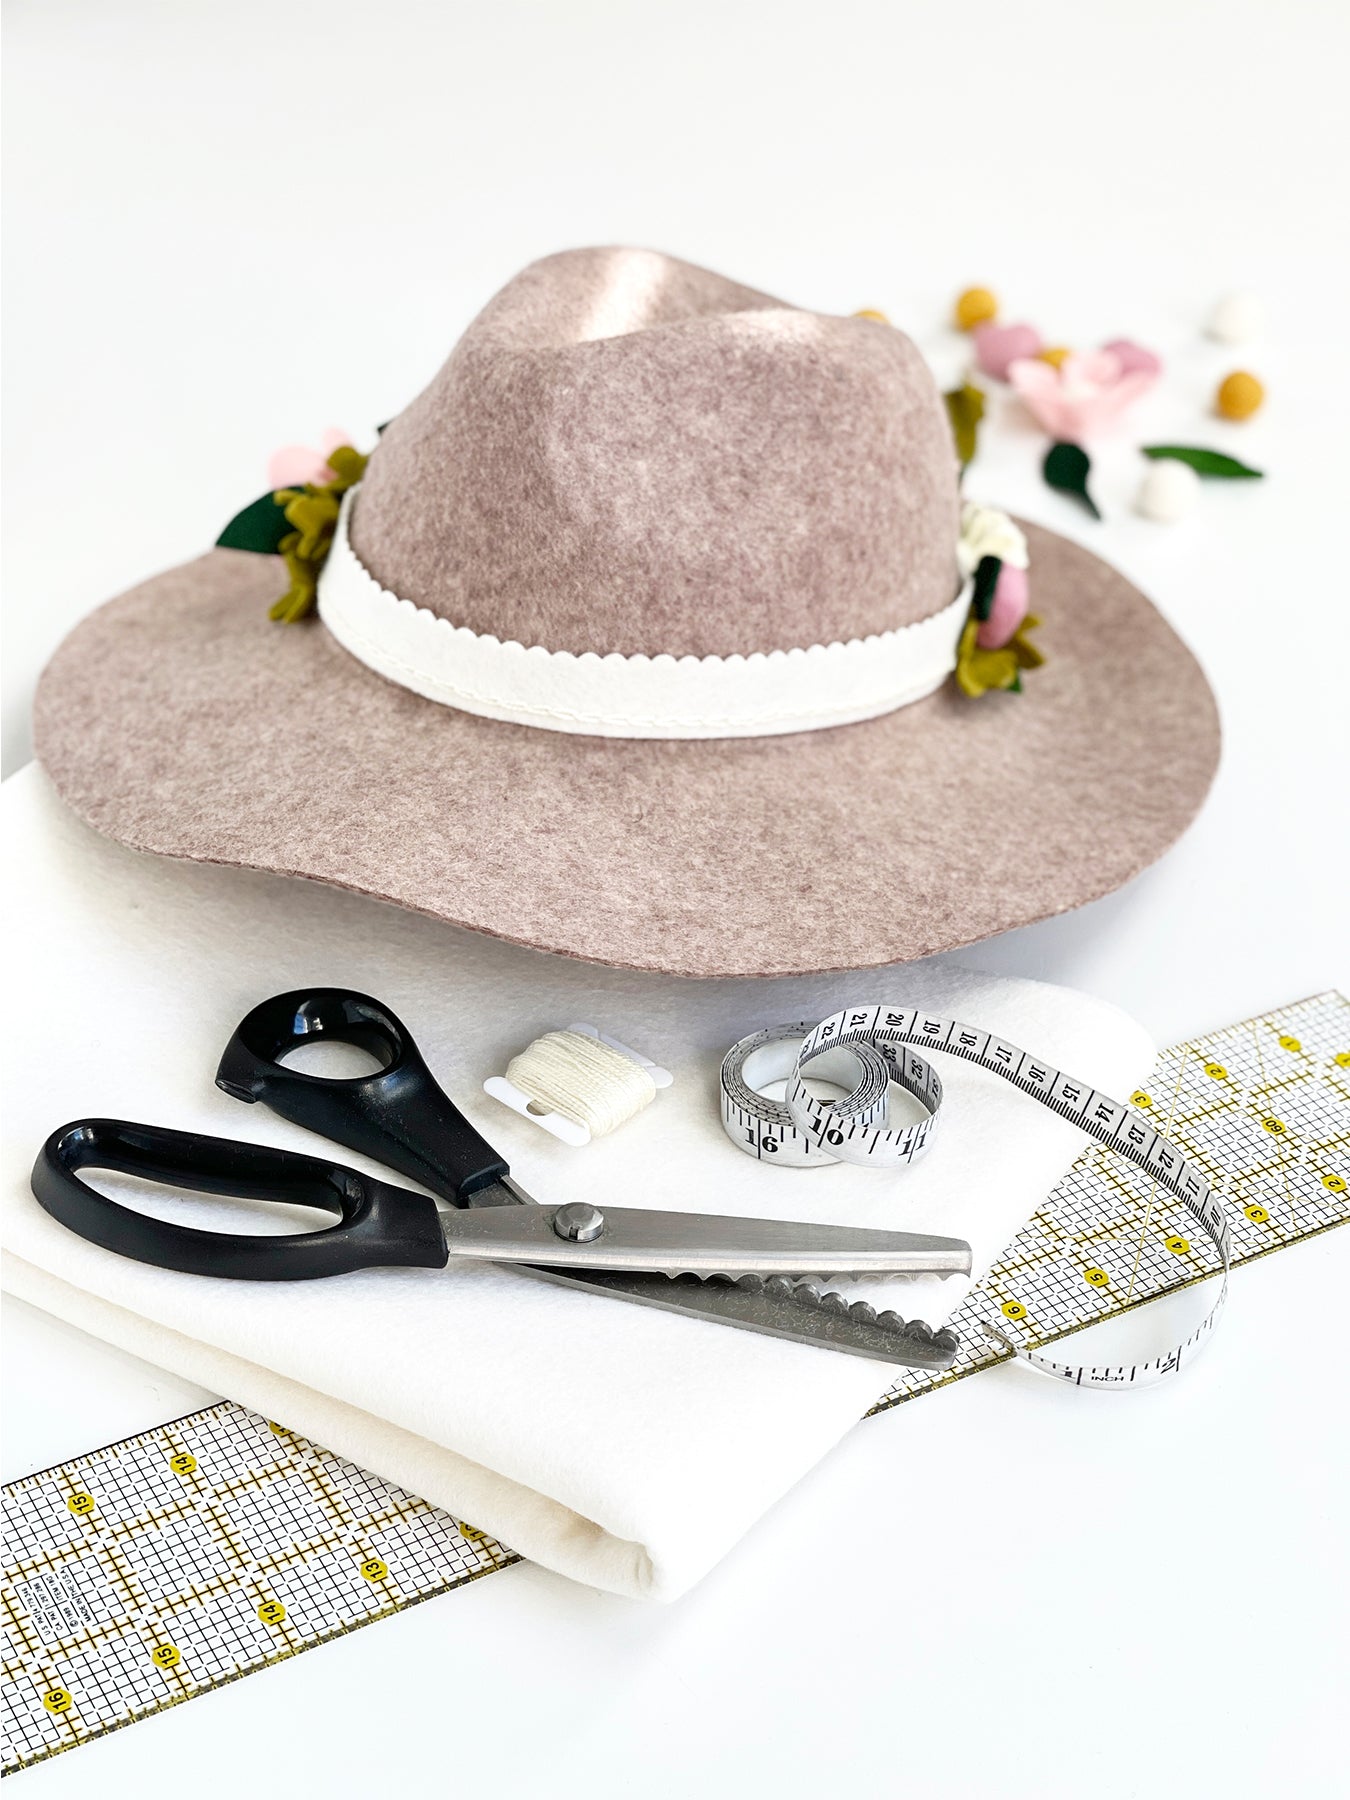 How to make a felt band for hat — The Felt Store's DIY Felt Hat Band Tutorial by Lorrie Everitt of Make and Merry Co.